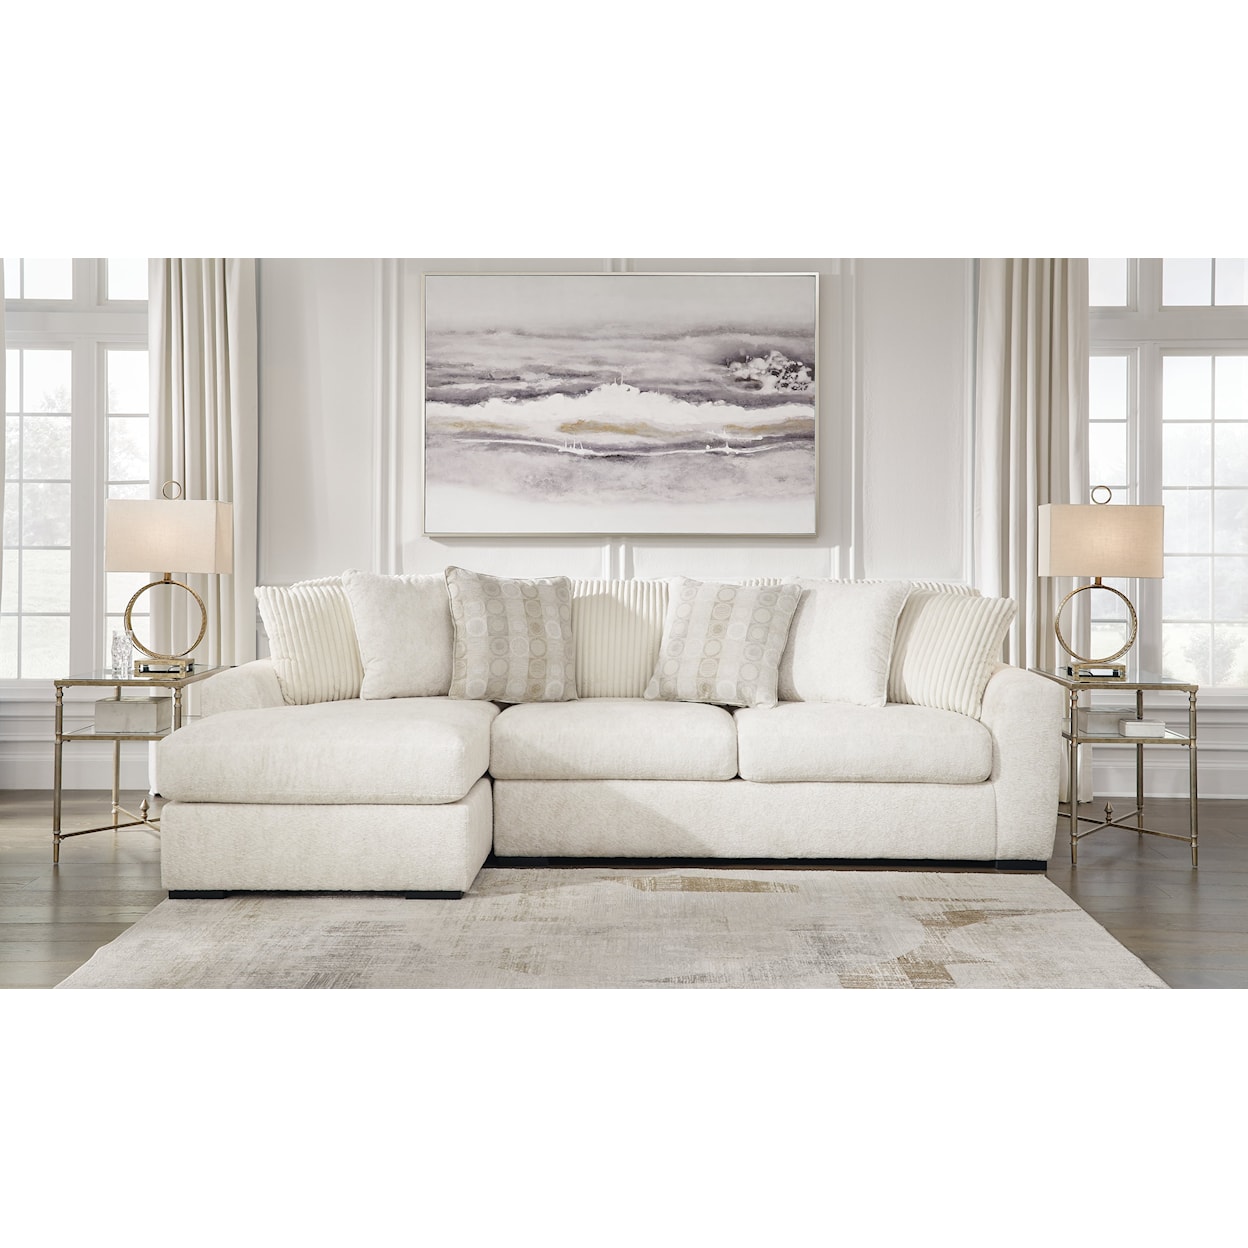 StyleLine Chessington 2-Piece Sectional With Chaise